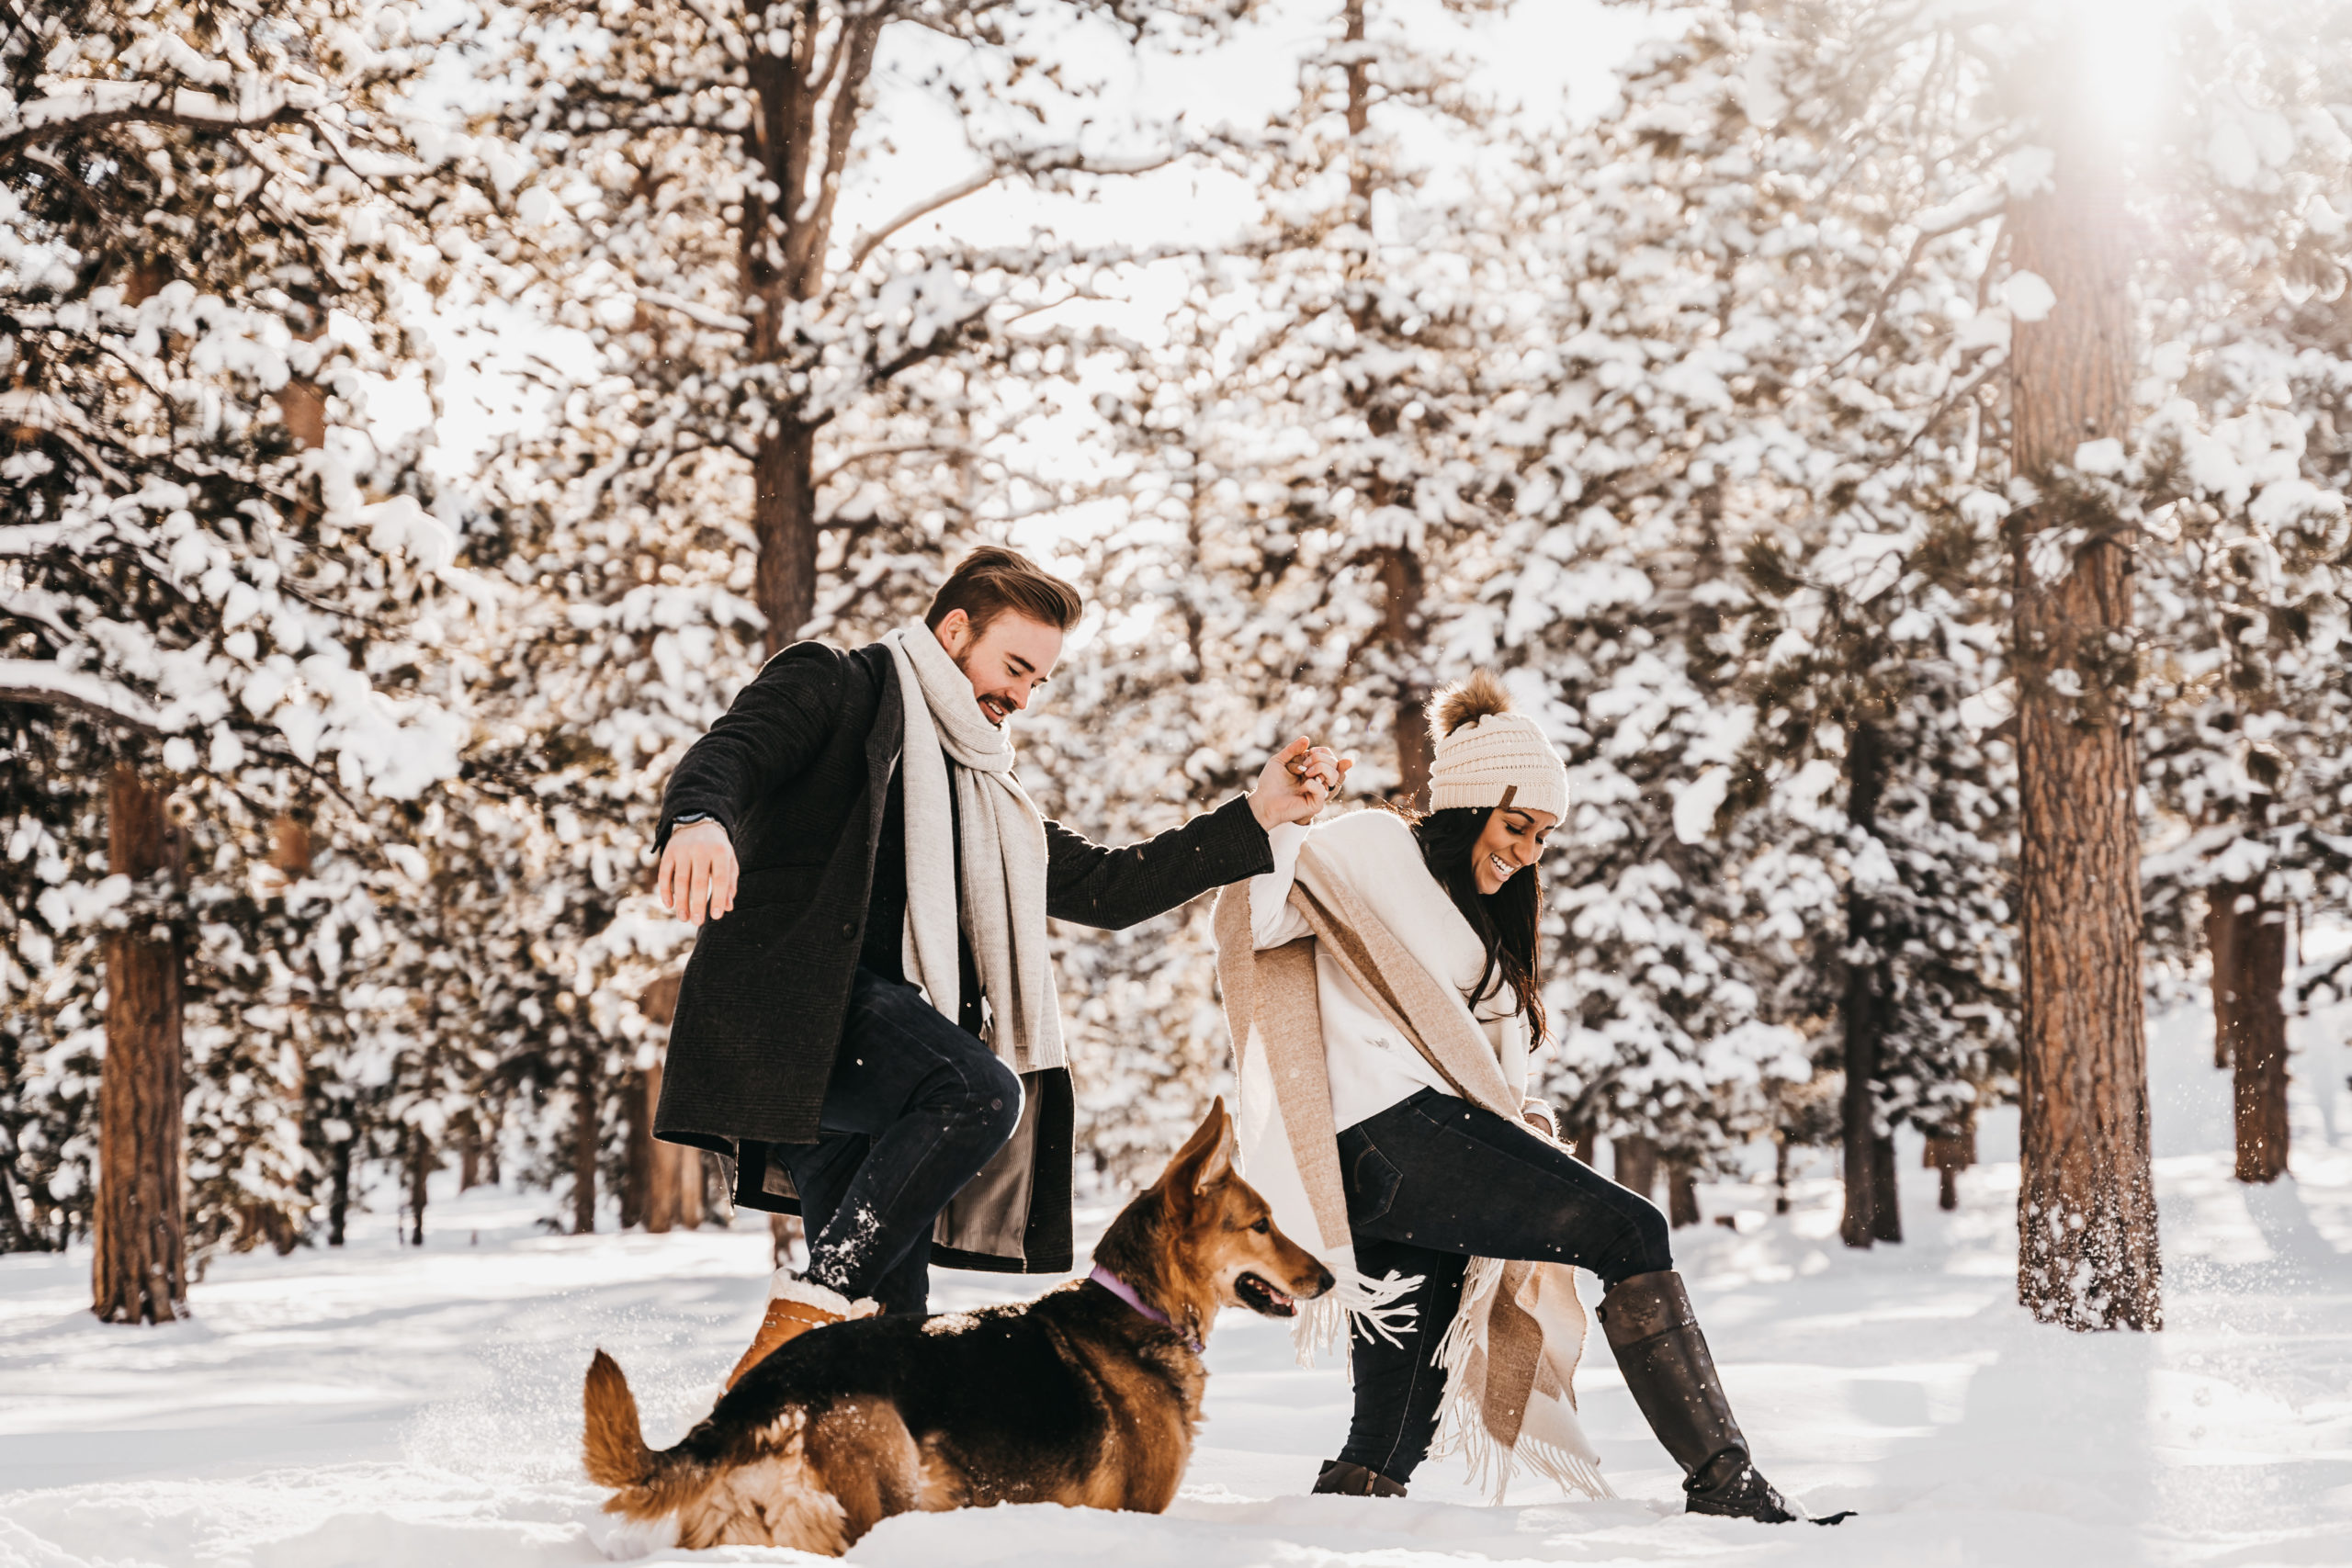 Mt. Charleston Engagement Session | The Combs Creative